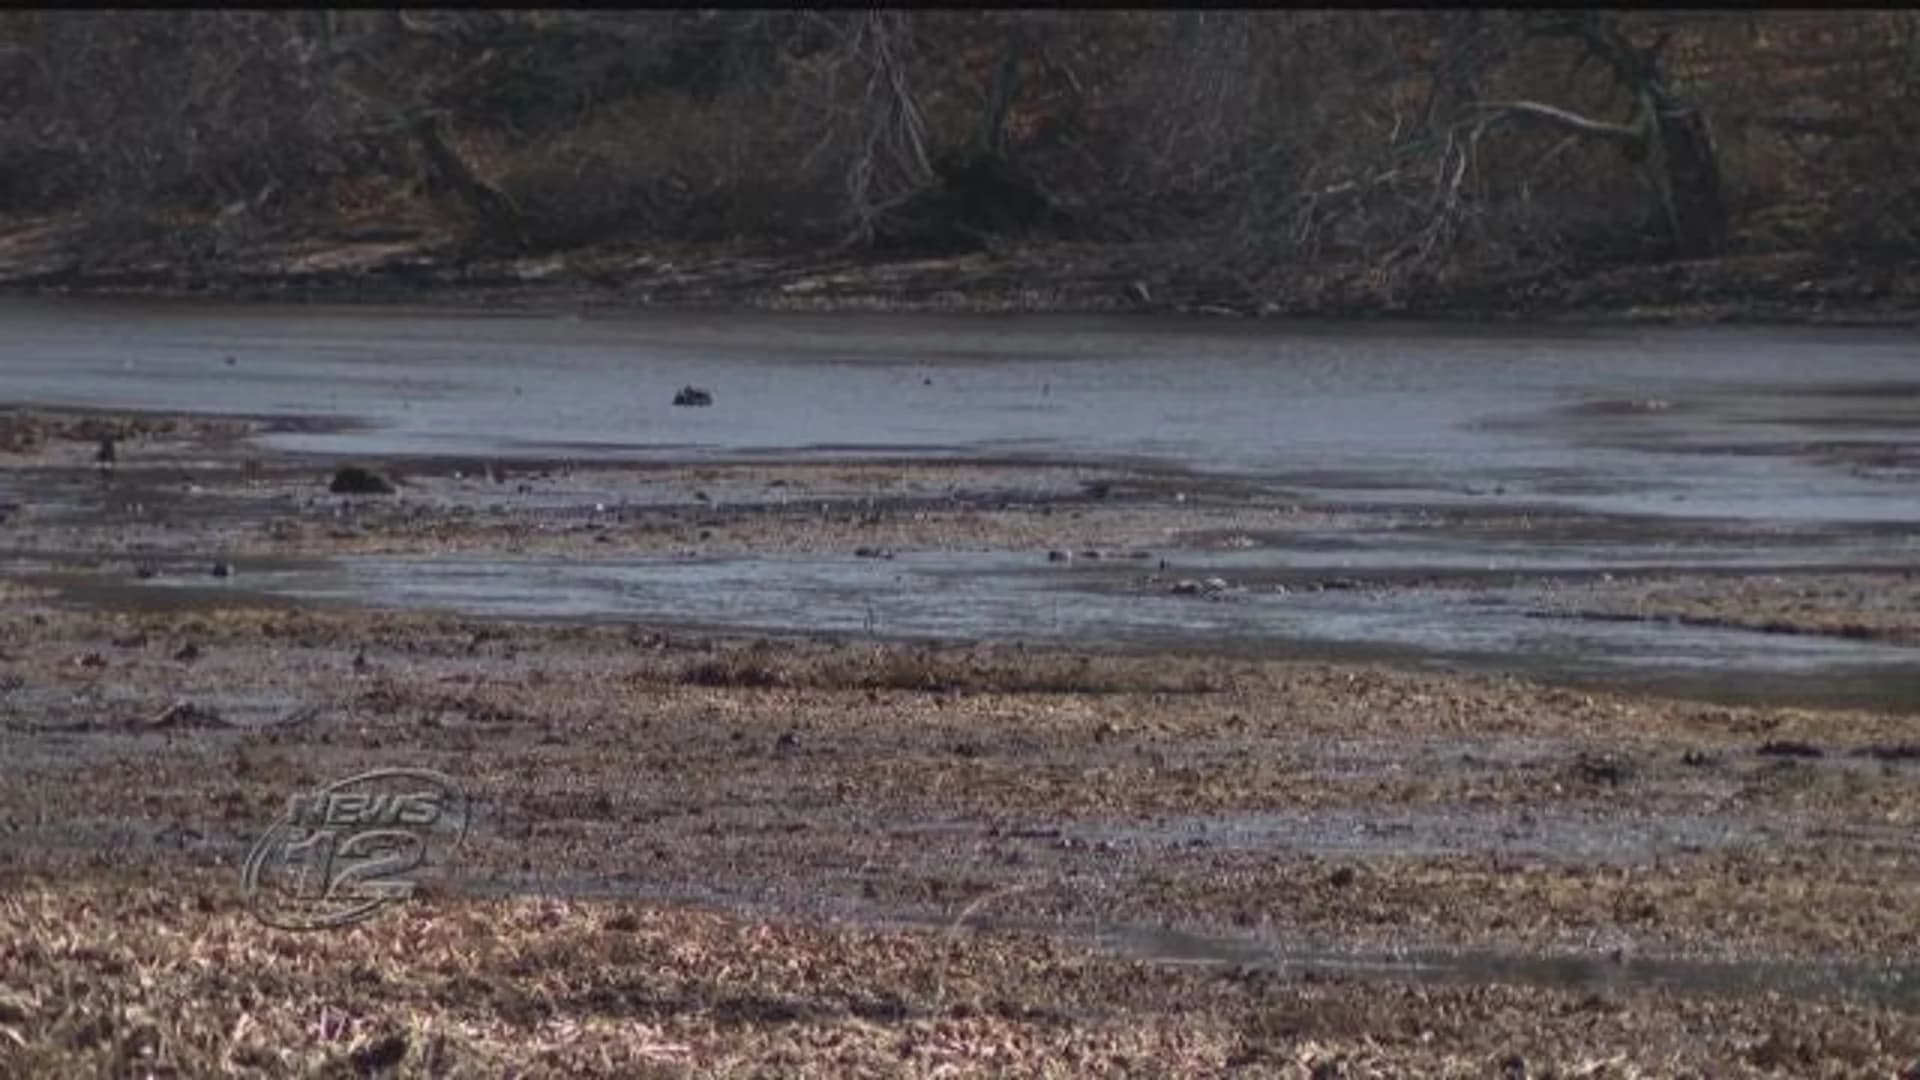 Biologist says lake draining project is being done improperly